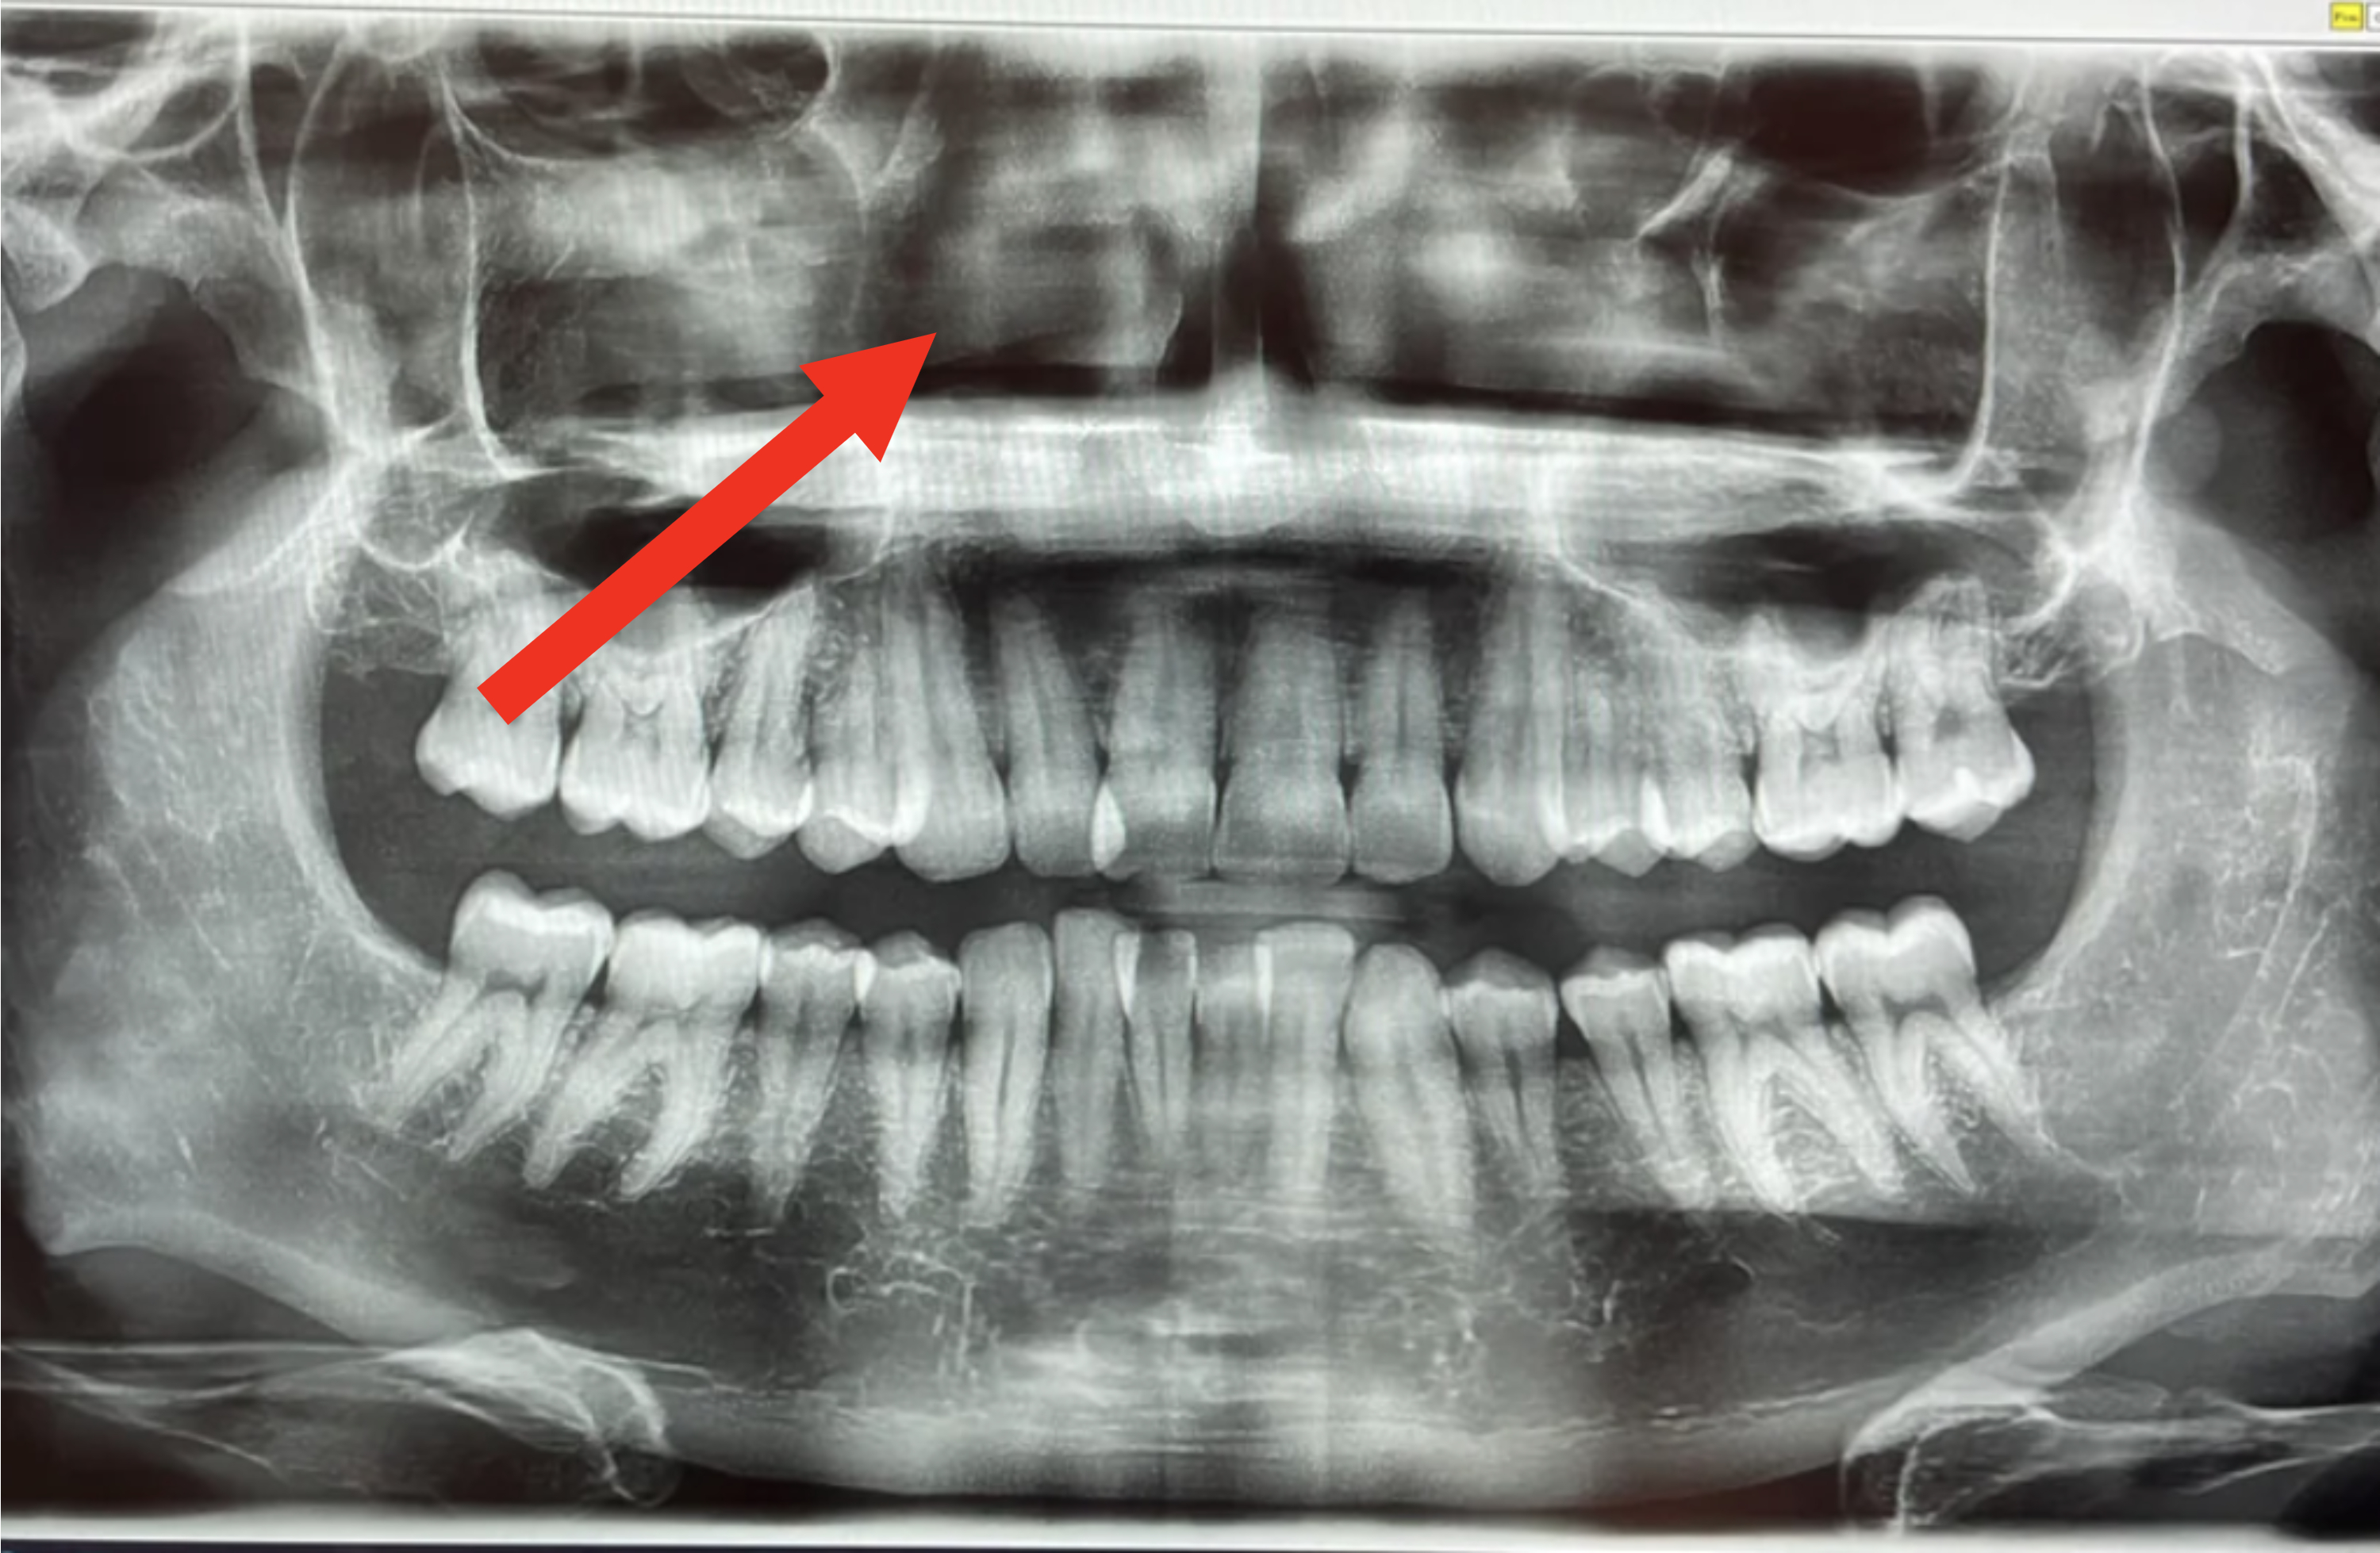 An X-ray image showing a full set of adult human teeth, highlighting the jaw, teeth alignment, and bone structure